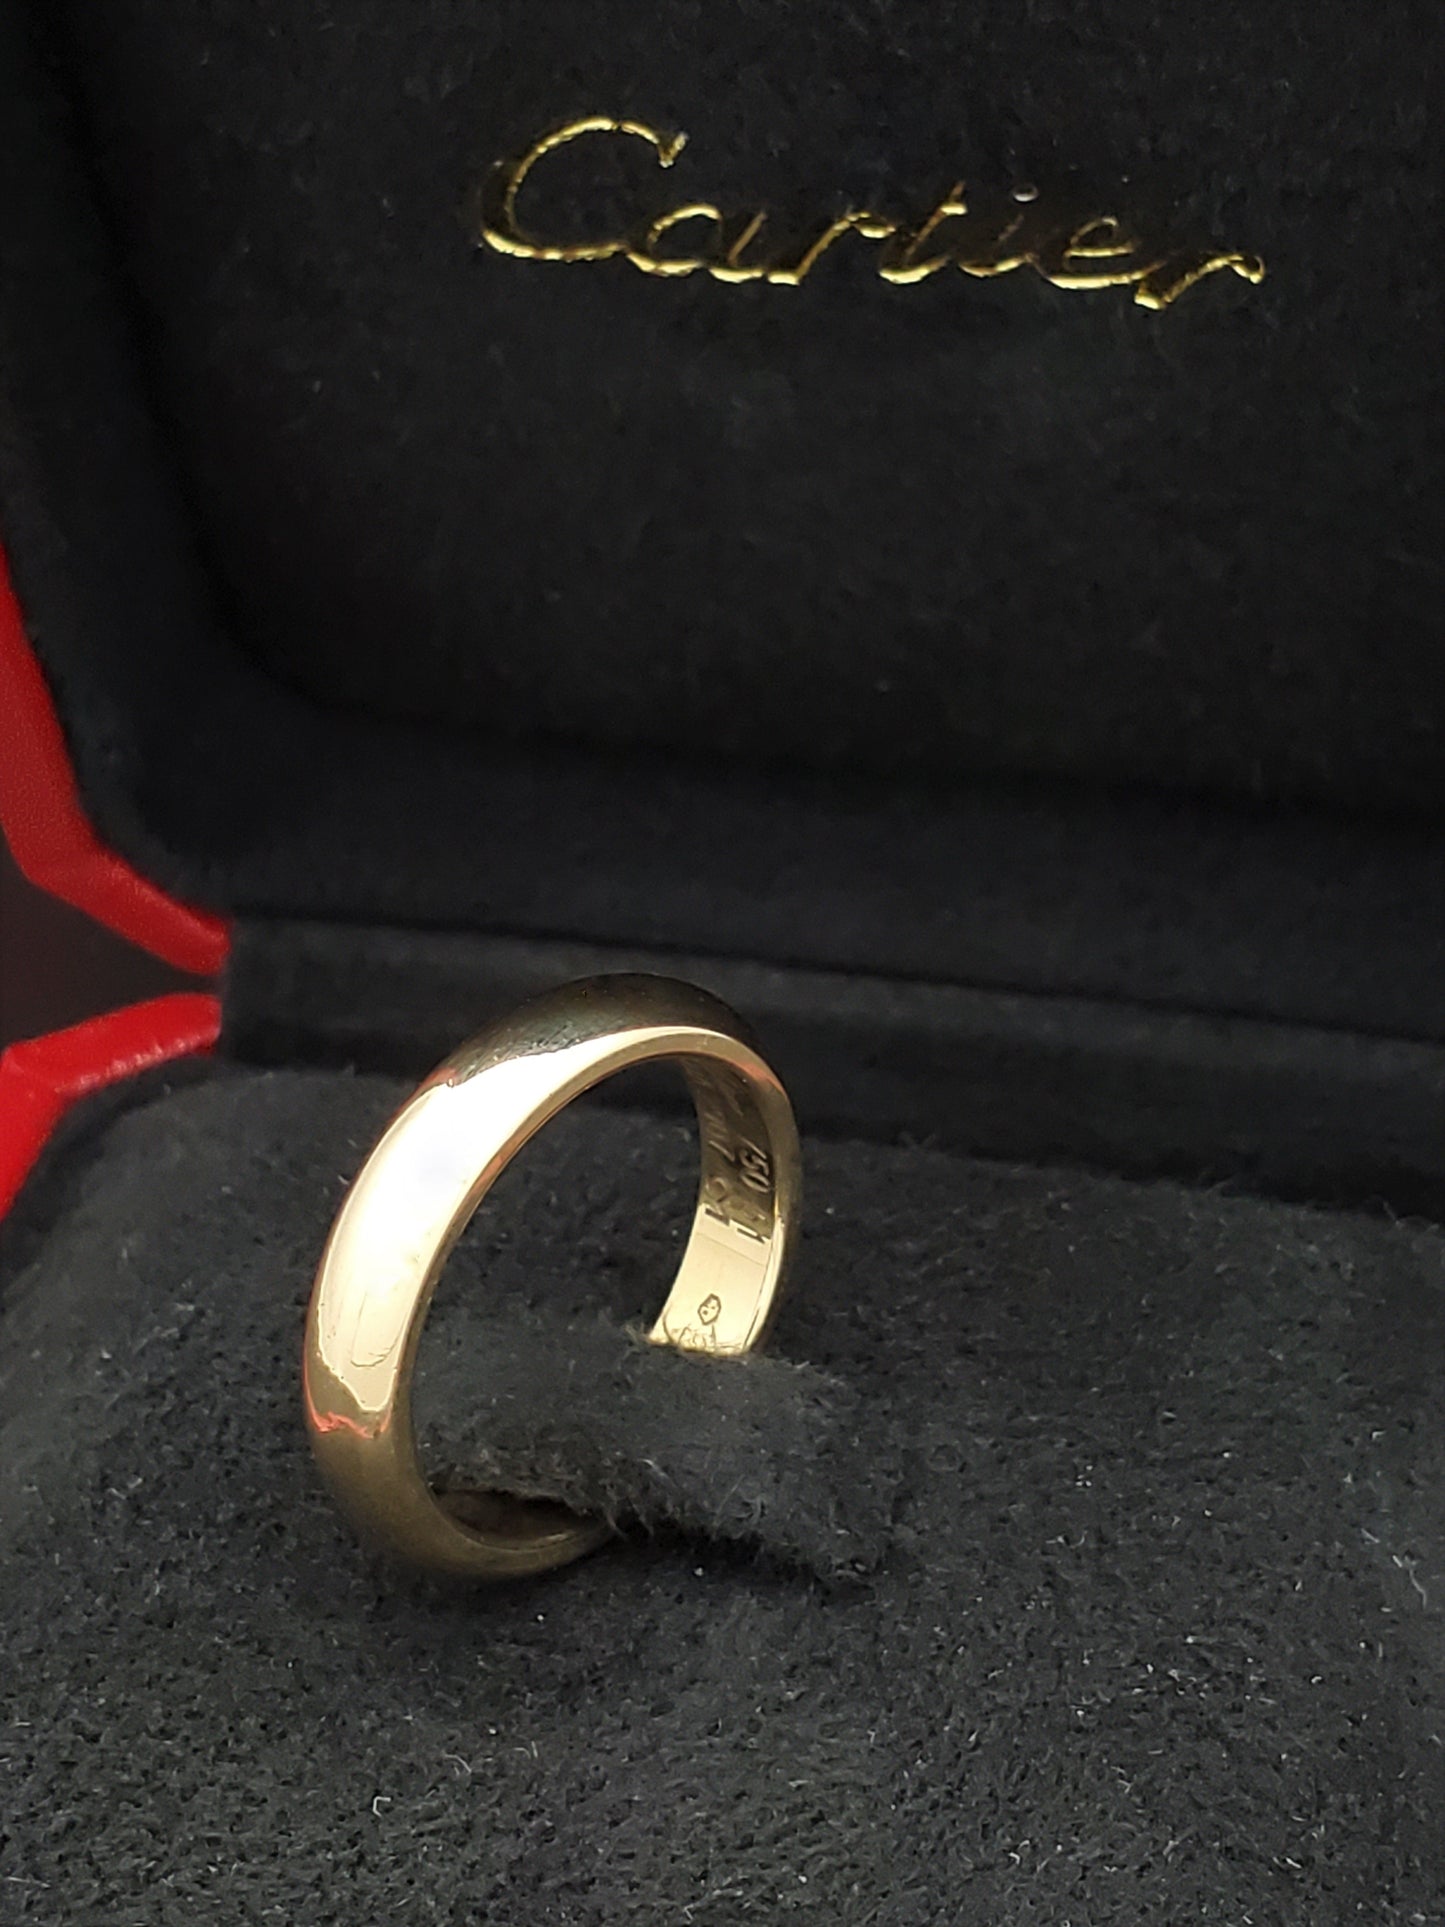 Cartier 18K Yellow Gold 4mm Wide Wedding Band Ring US Size 5.75 Euro Size 51